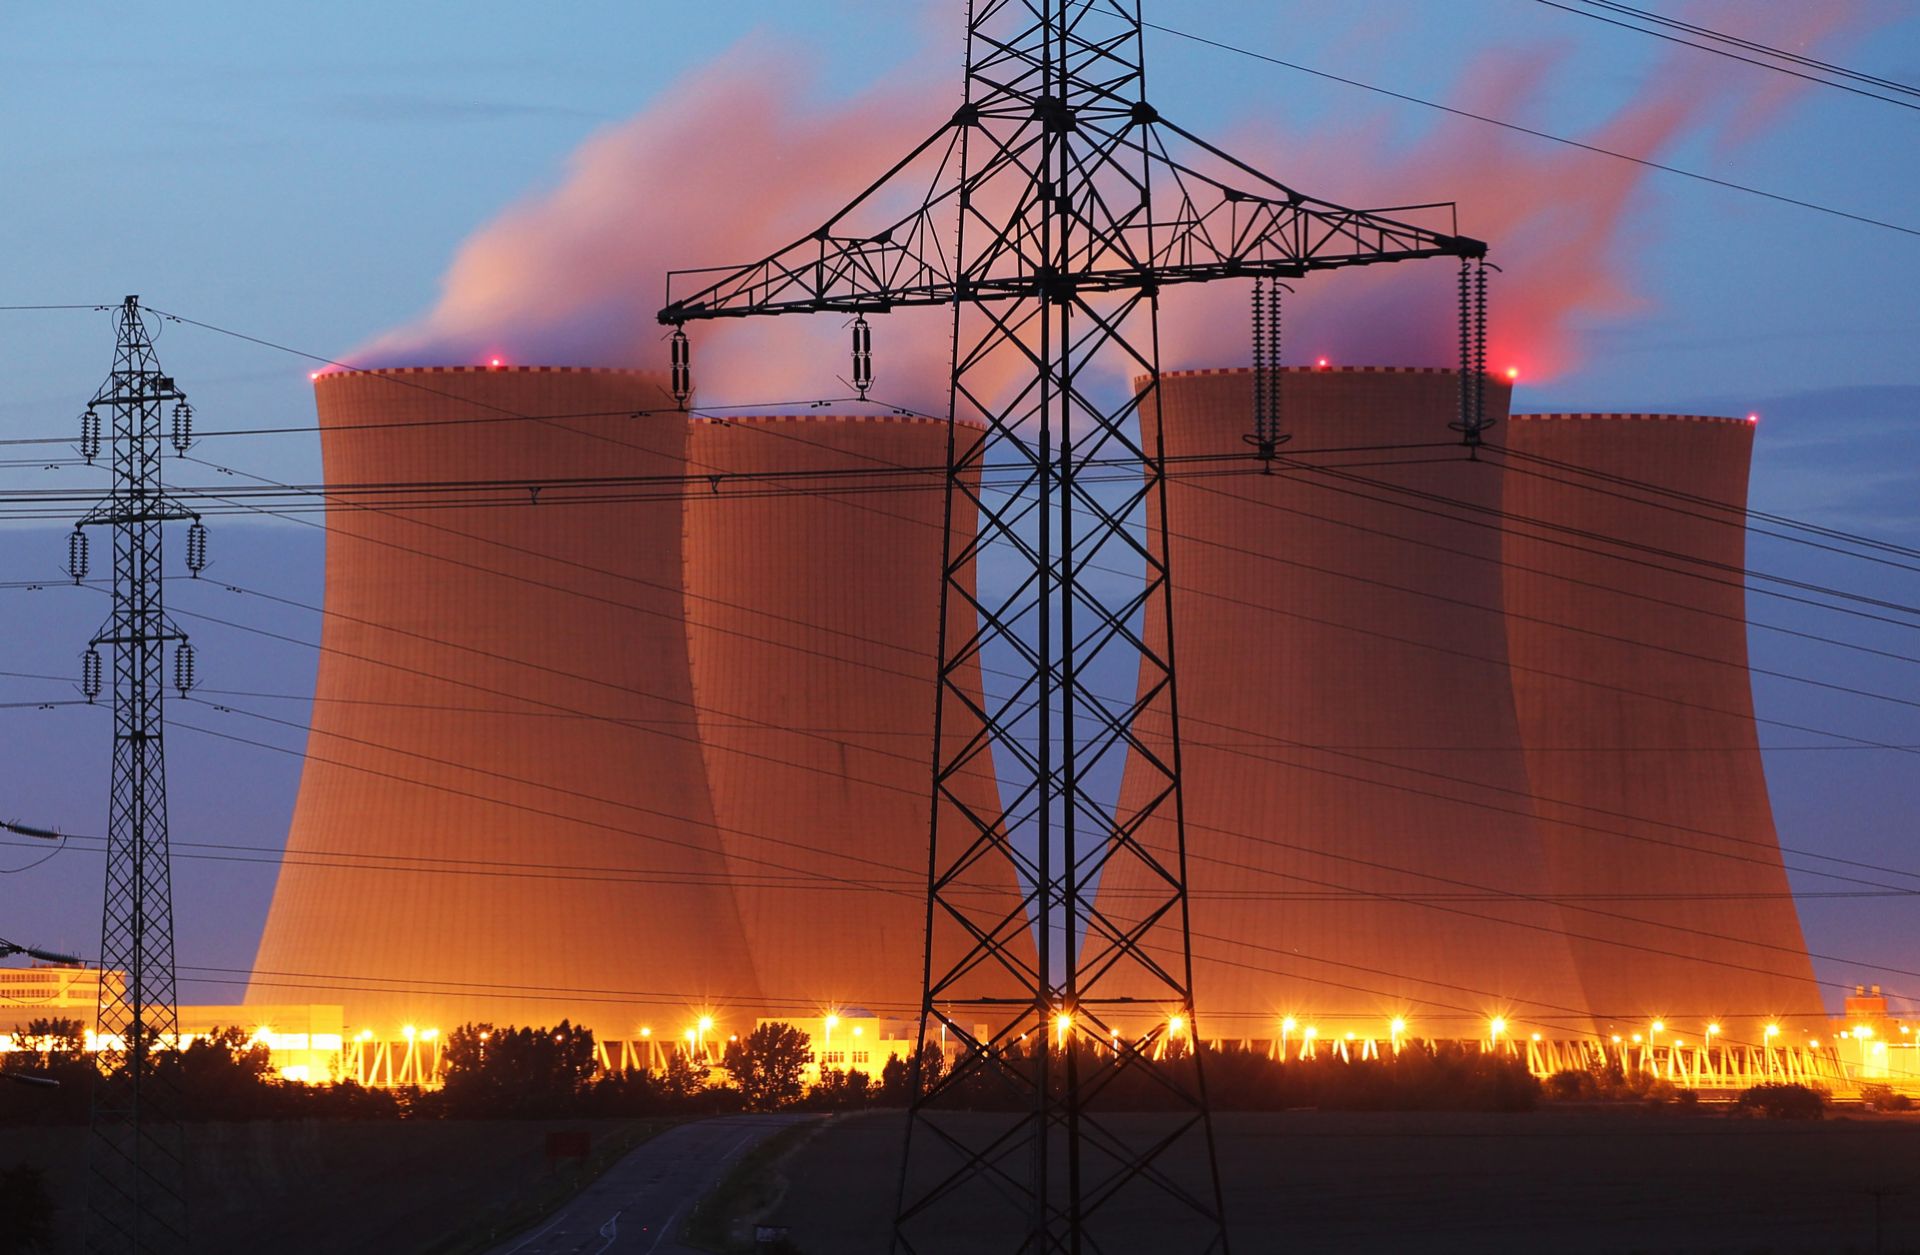 Streetlights illuminate the four cooling towers of the Temelin nuclear power plant in the Czech Republic in 2011.